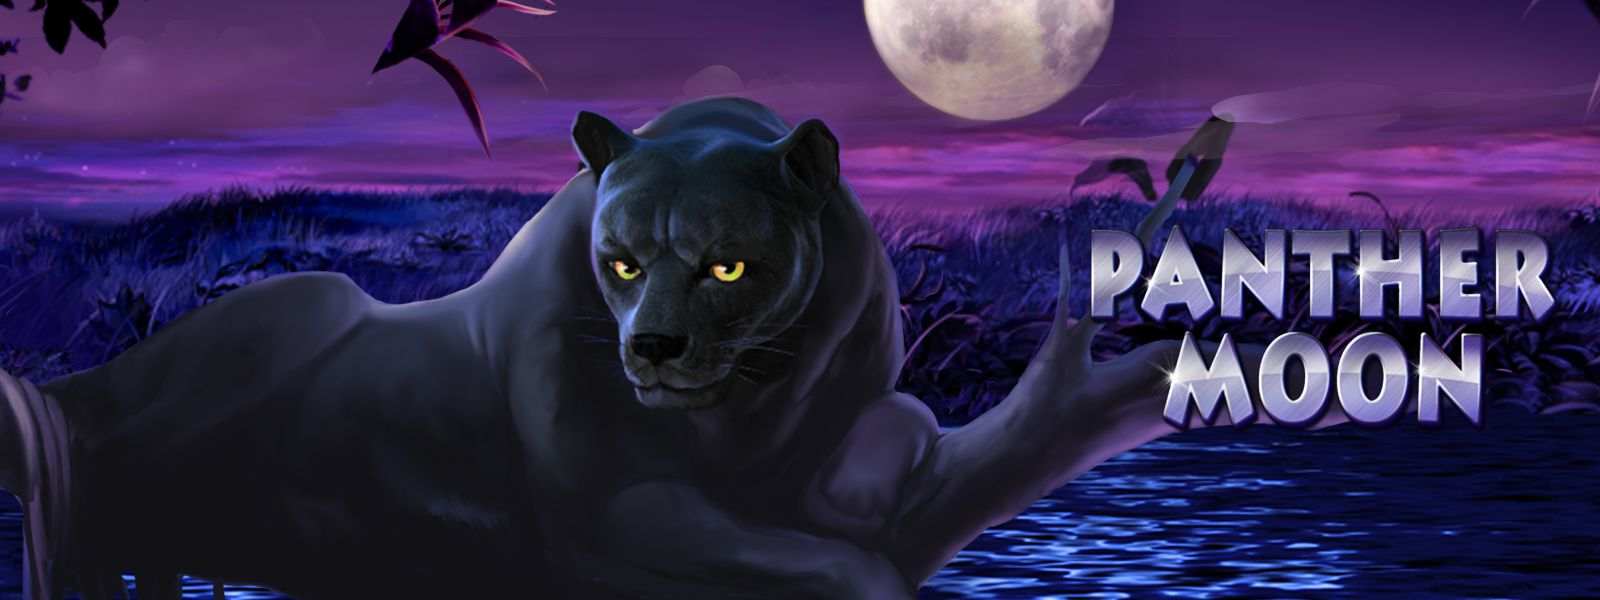 SCR888-panther-moon